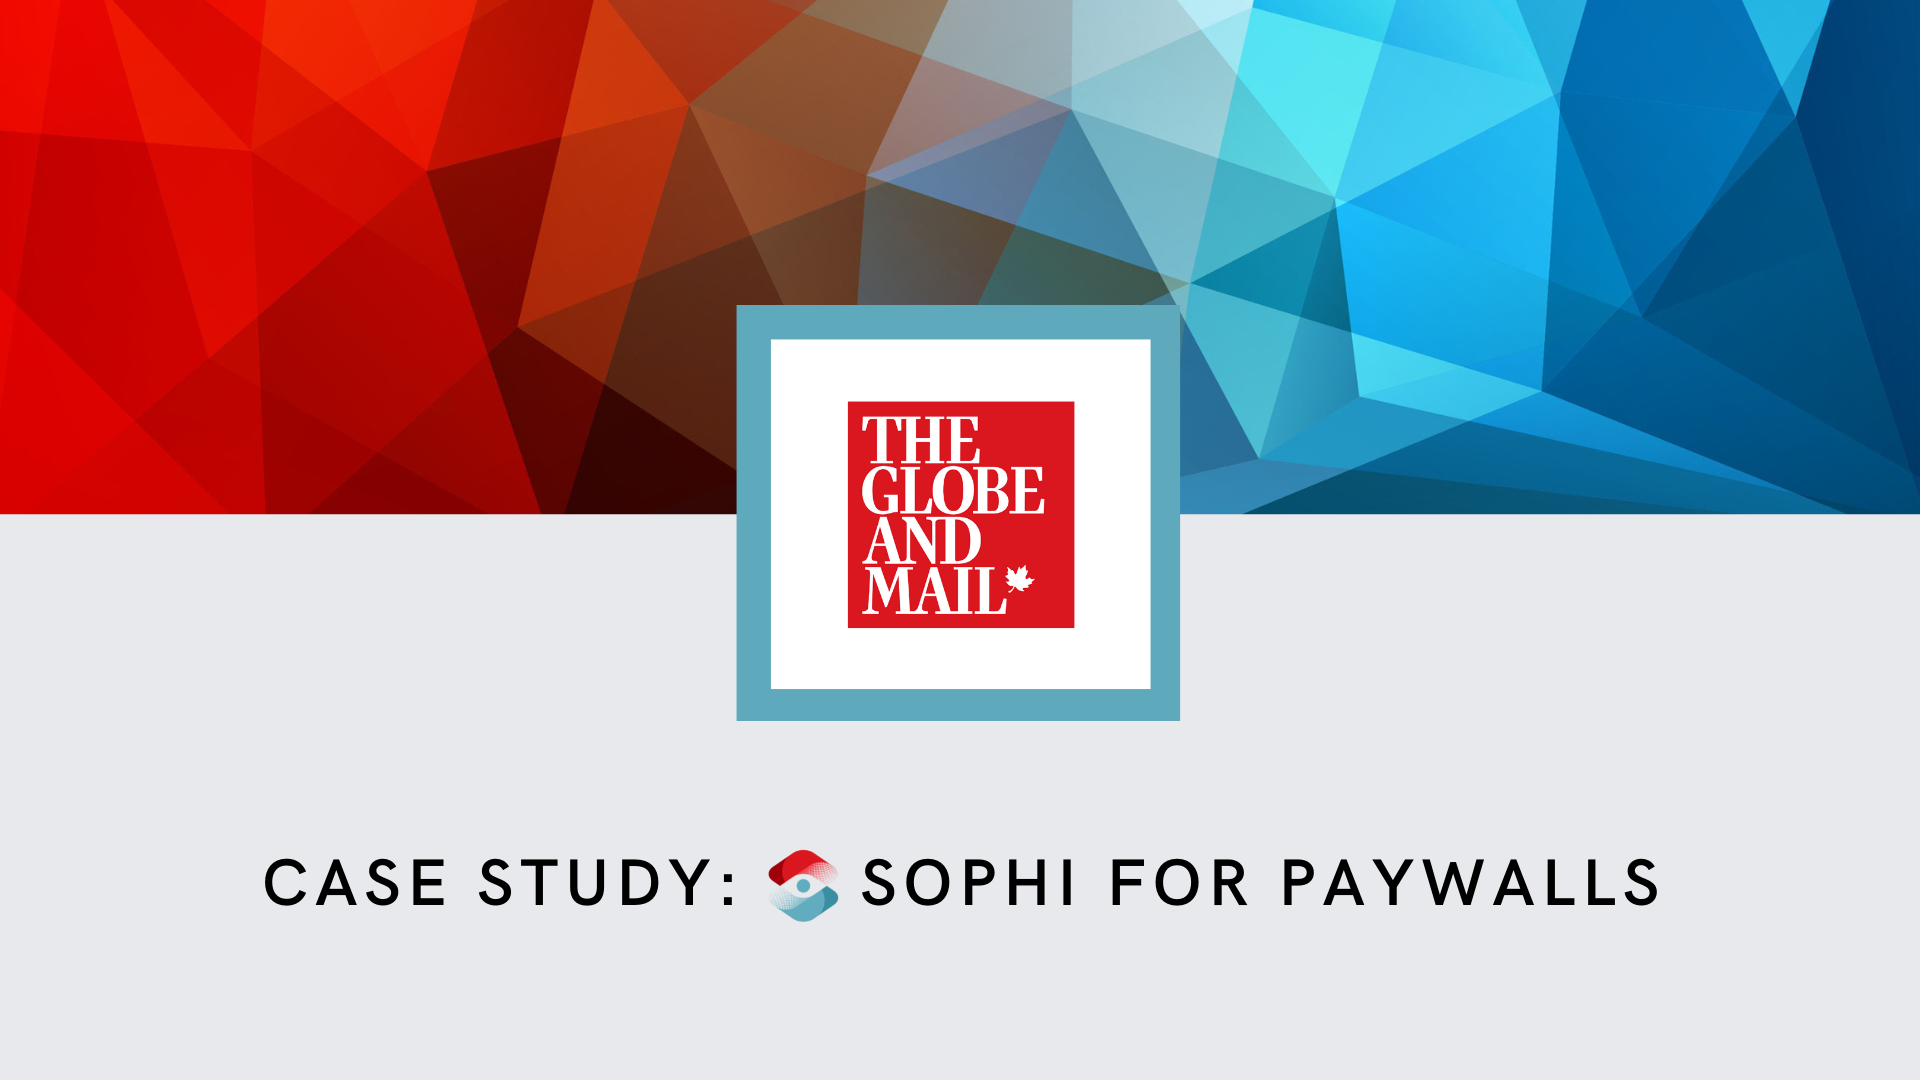 Case Study: Sophi for Paywalls at The Globe and Mail